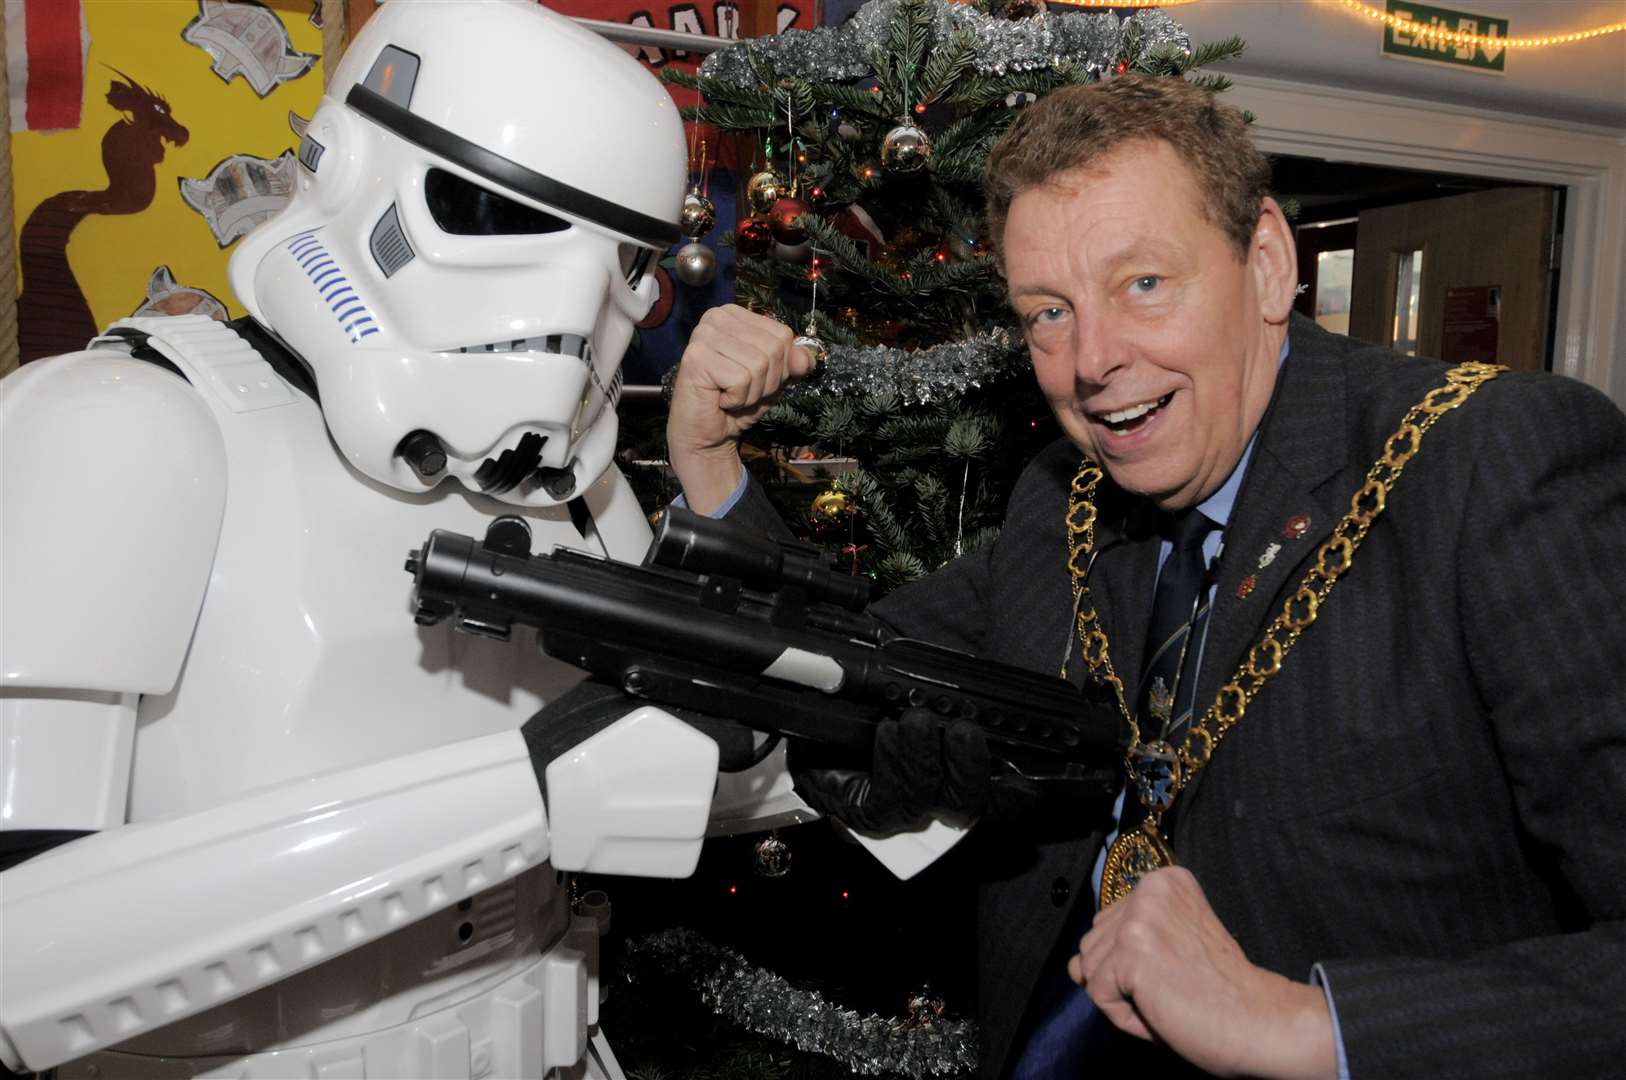 Adrian Crowther takes on an Imperial Stormtrooper at the Canterbury Road Primary School Christmas Fair in Sittingbourne during his mayoral term. Picture: Andy Payton